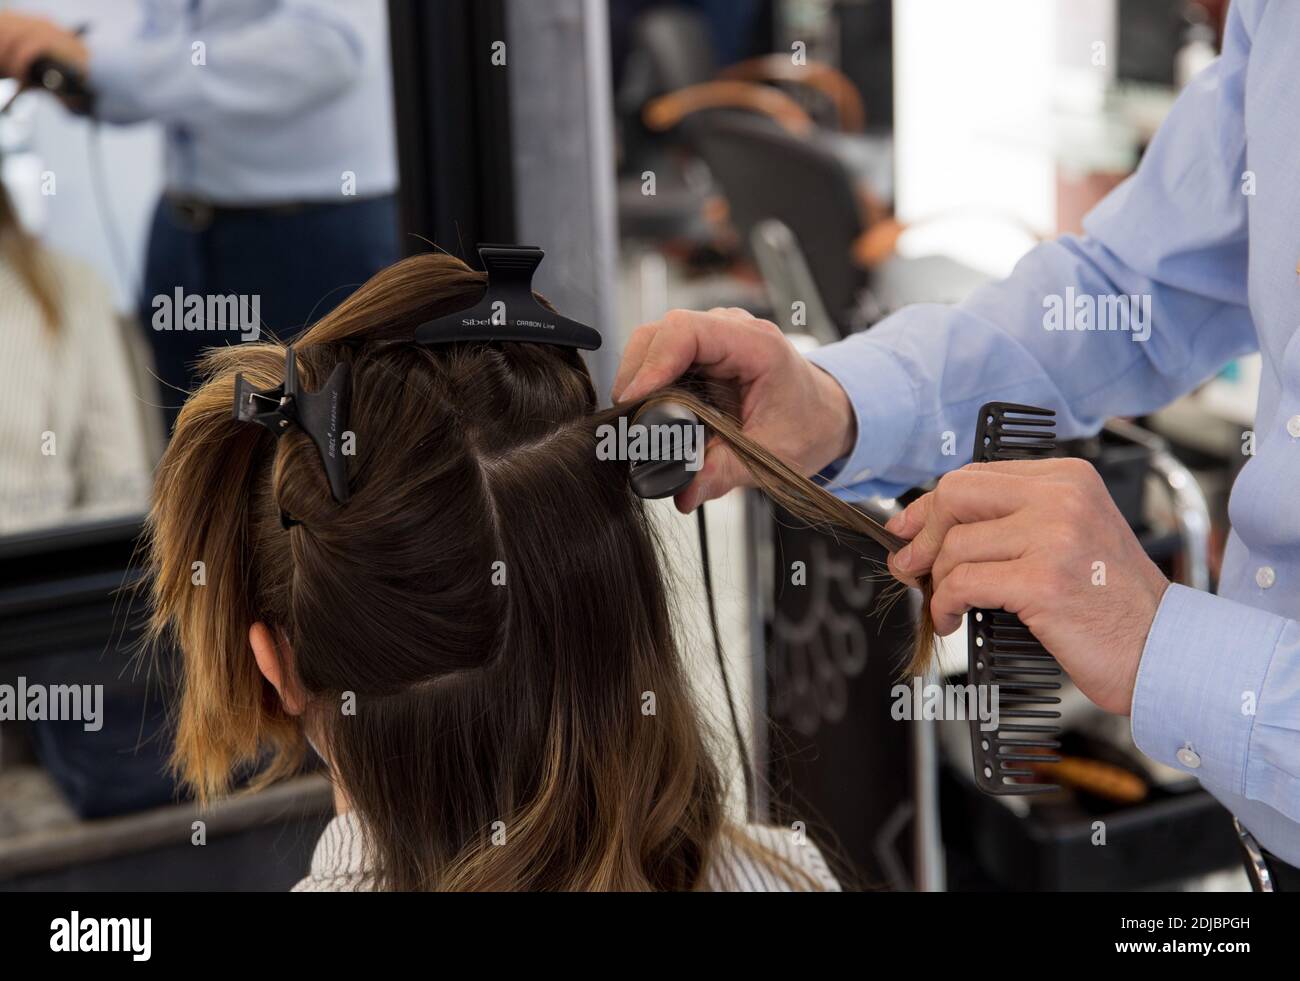 Woman, client, having her hair cut in a hairdressing salon. Medium length hair styled with a hair straightener Stock Photo